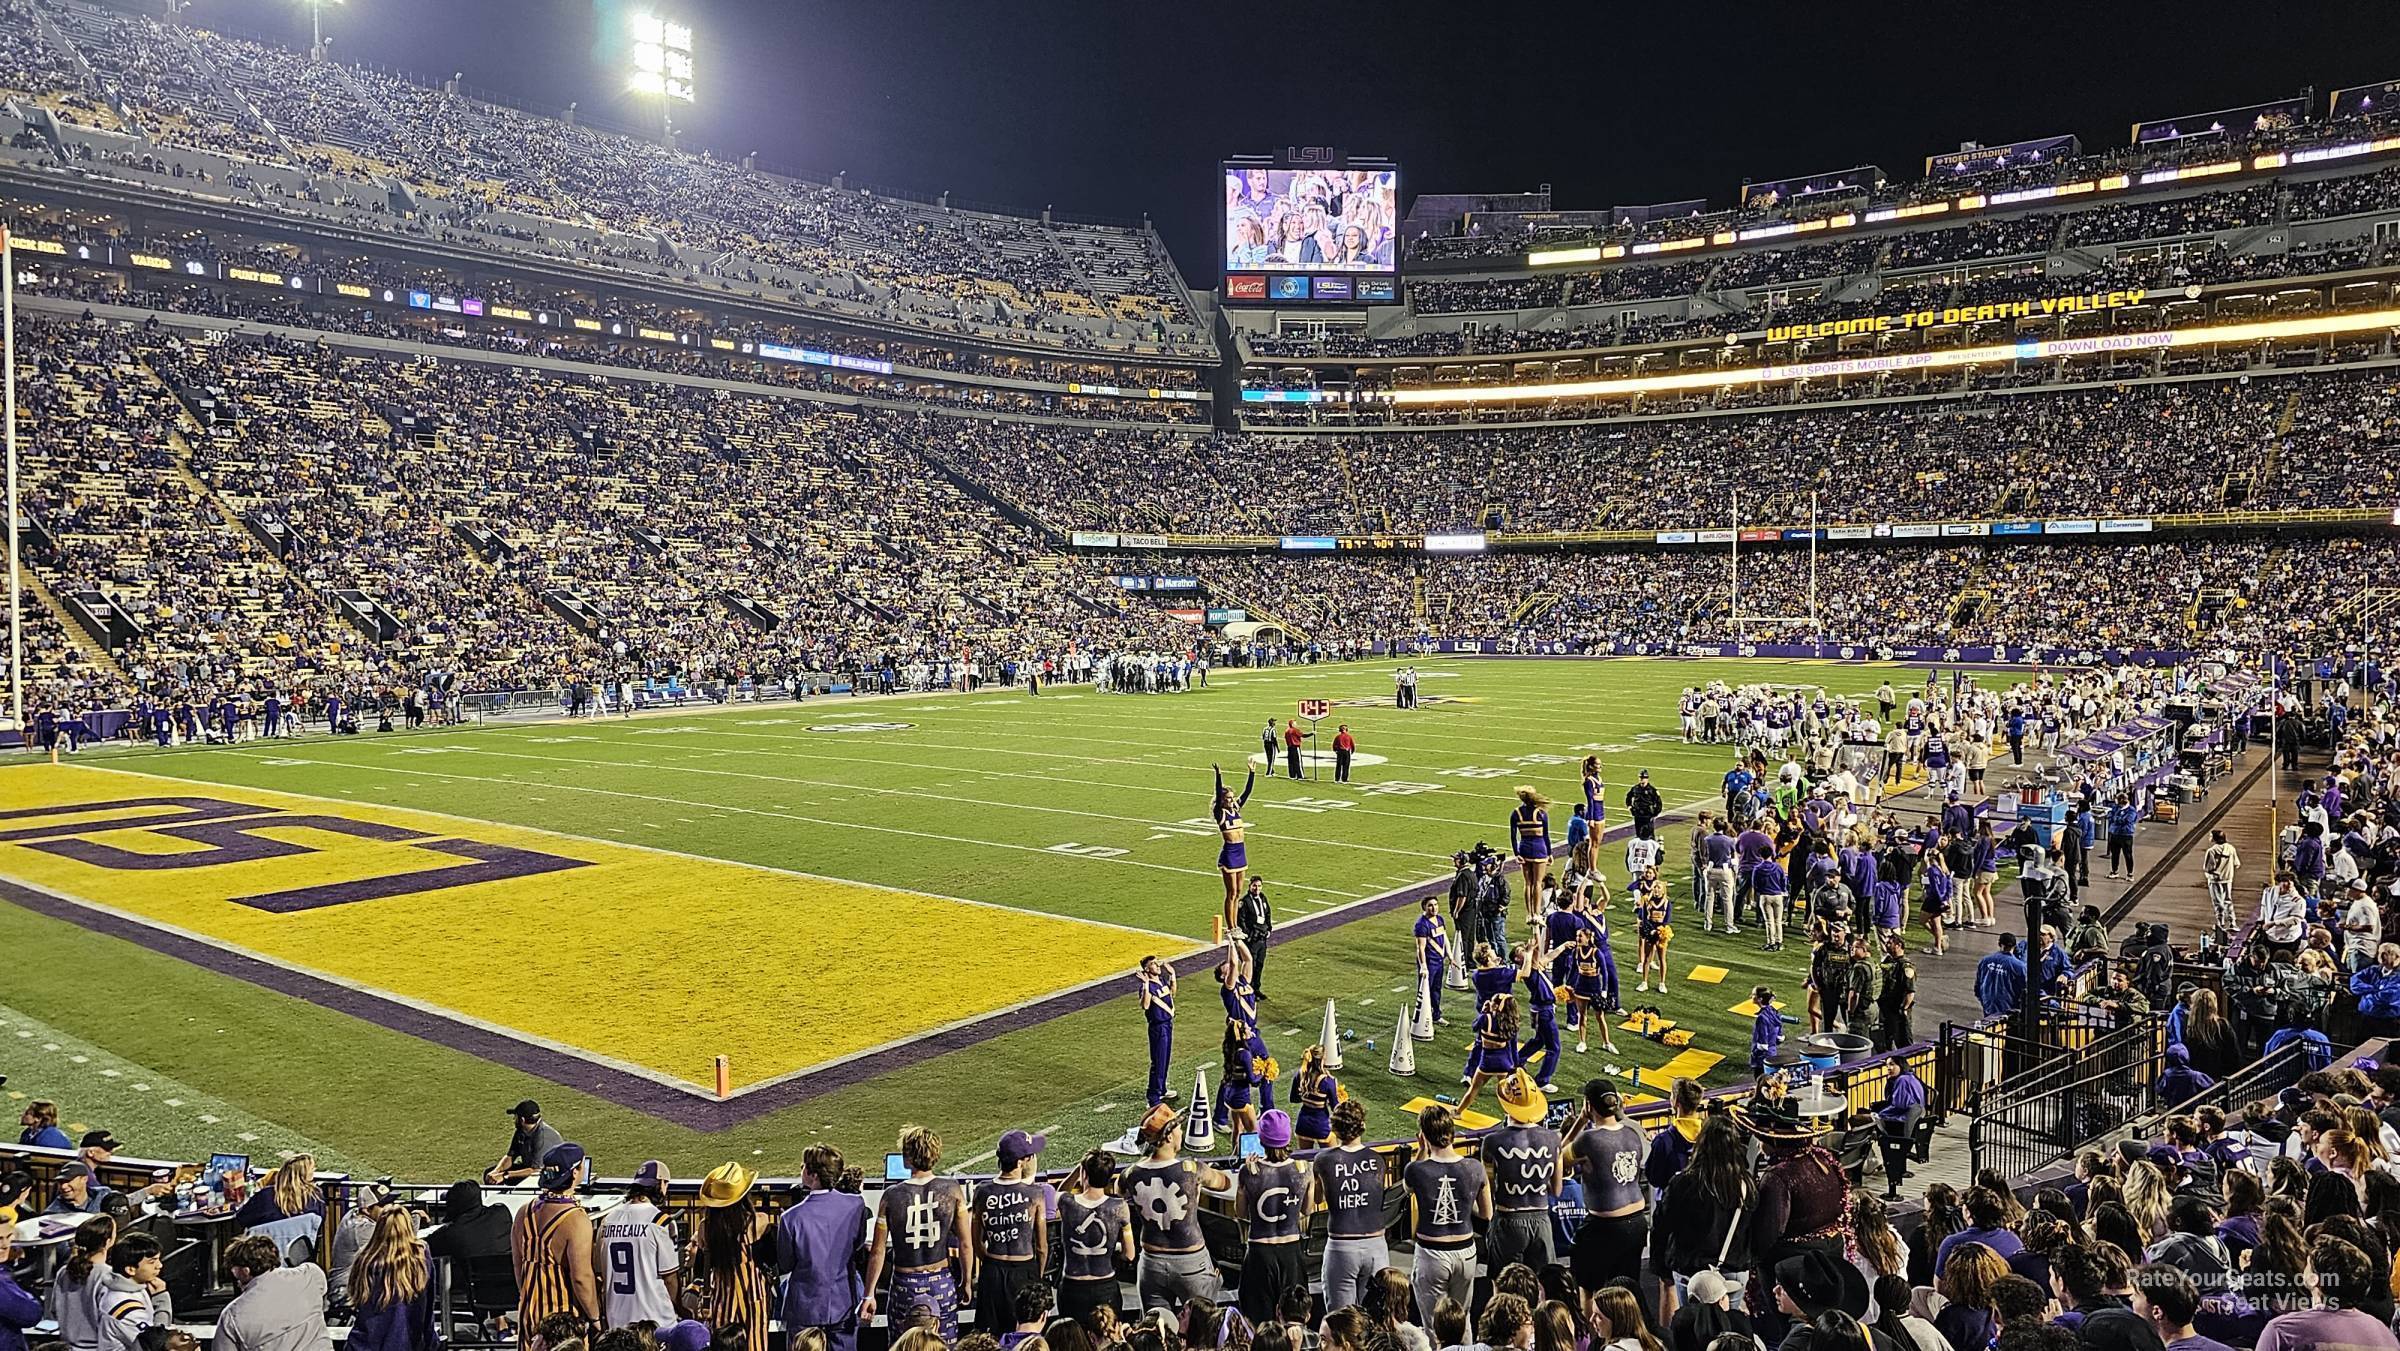 section 202, row 13 seat view  - tiger stadium